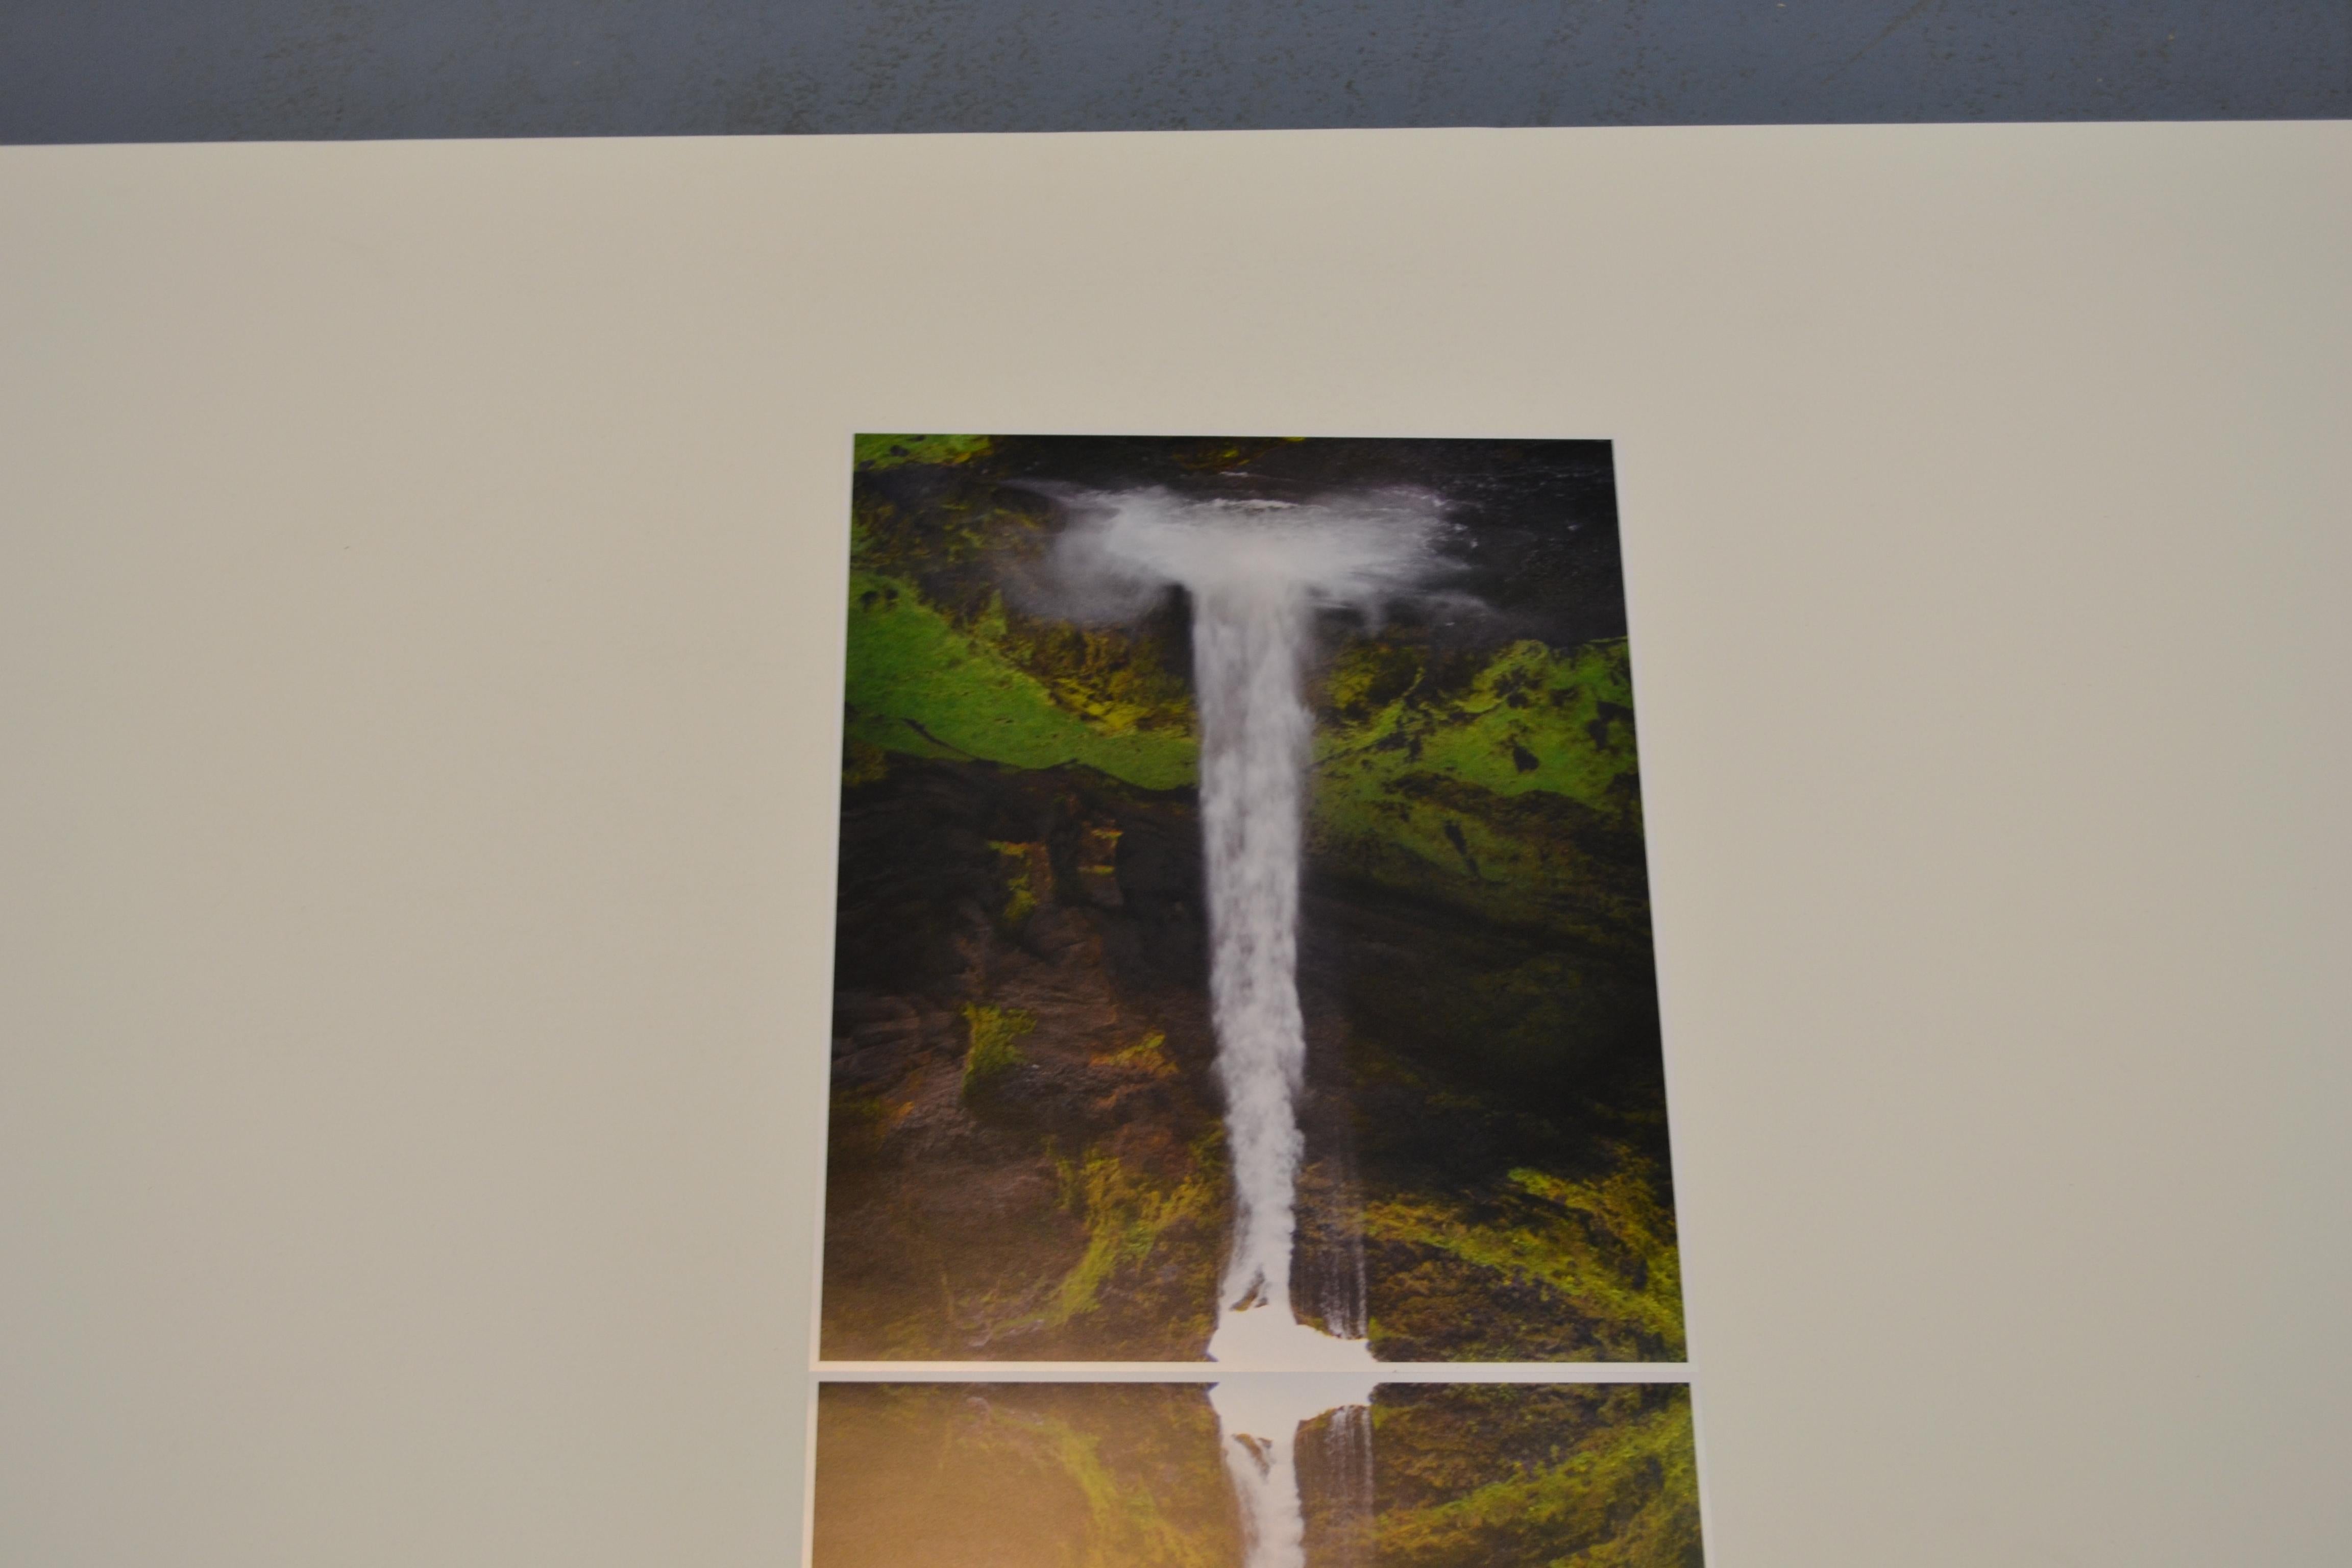 Contact is content at Seljalandsfoss, Contemporary, 21st Century, C Print For Sale 6